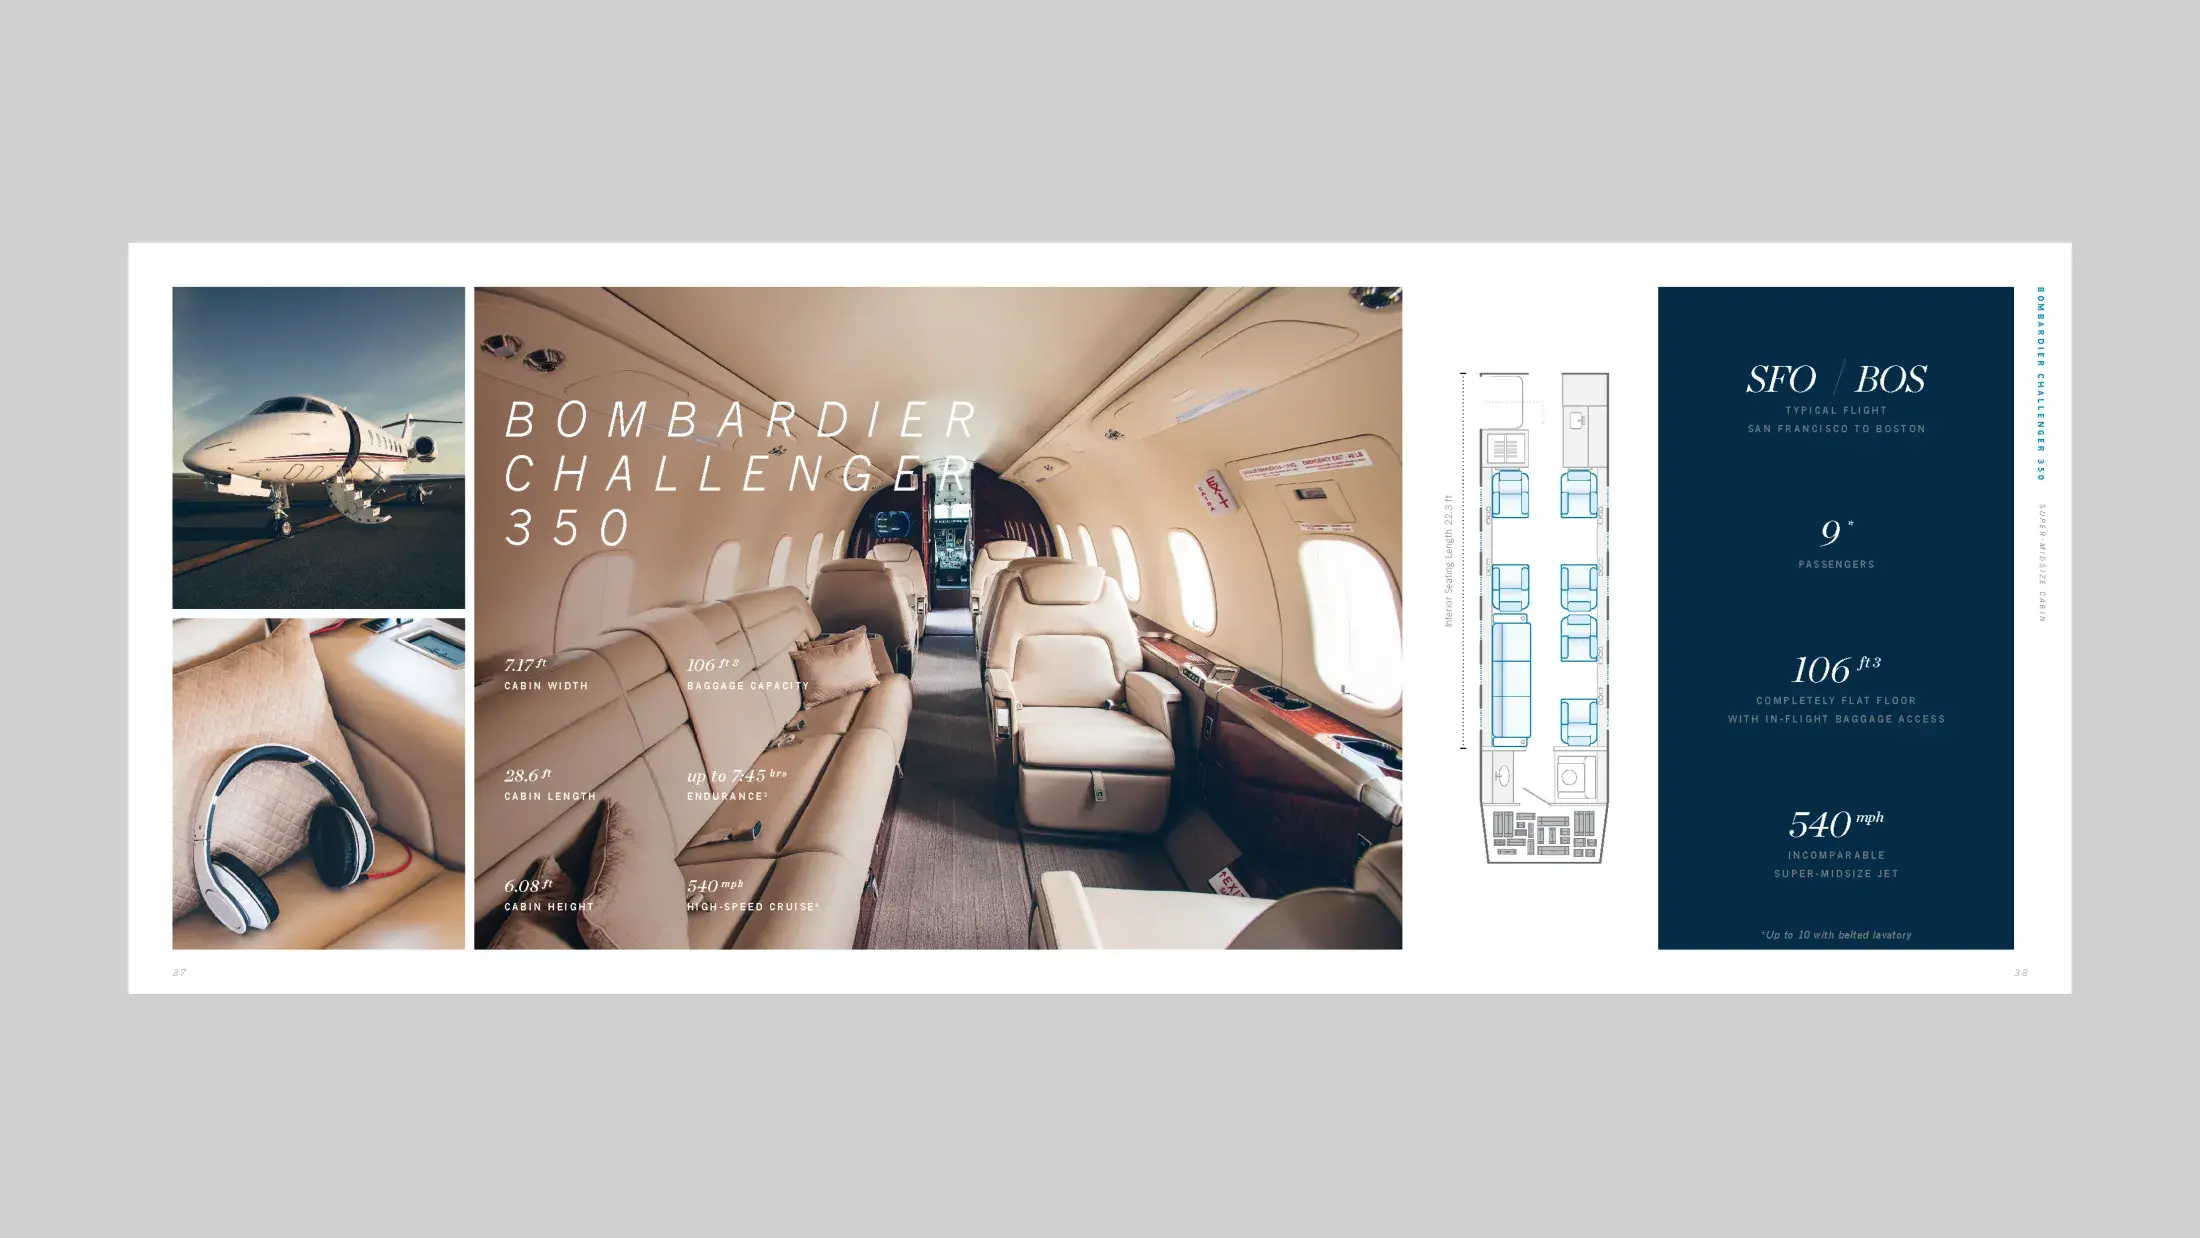 Bombardier Challenger 350 overview